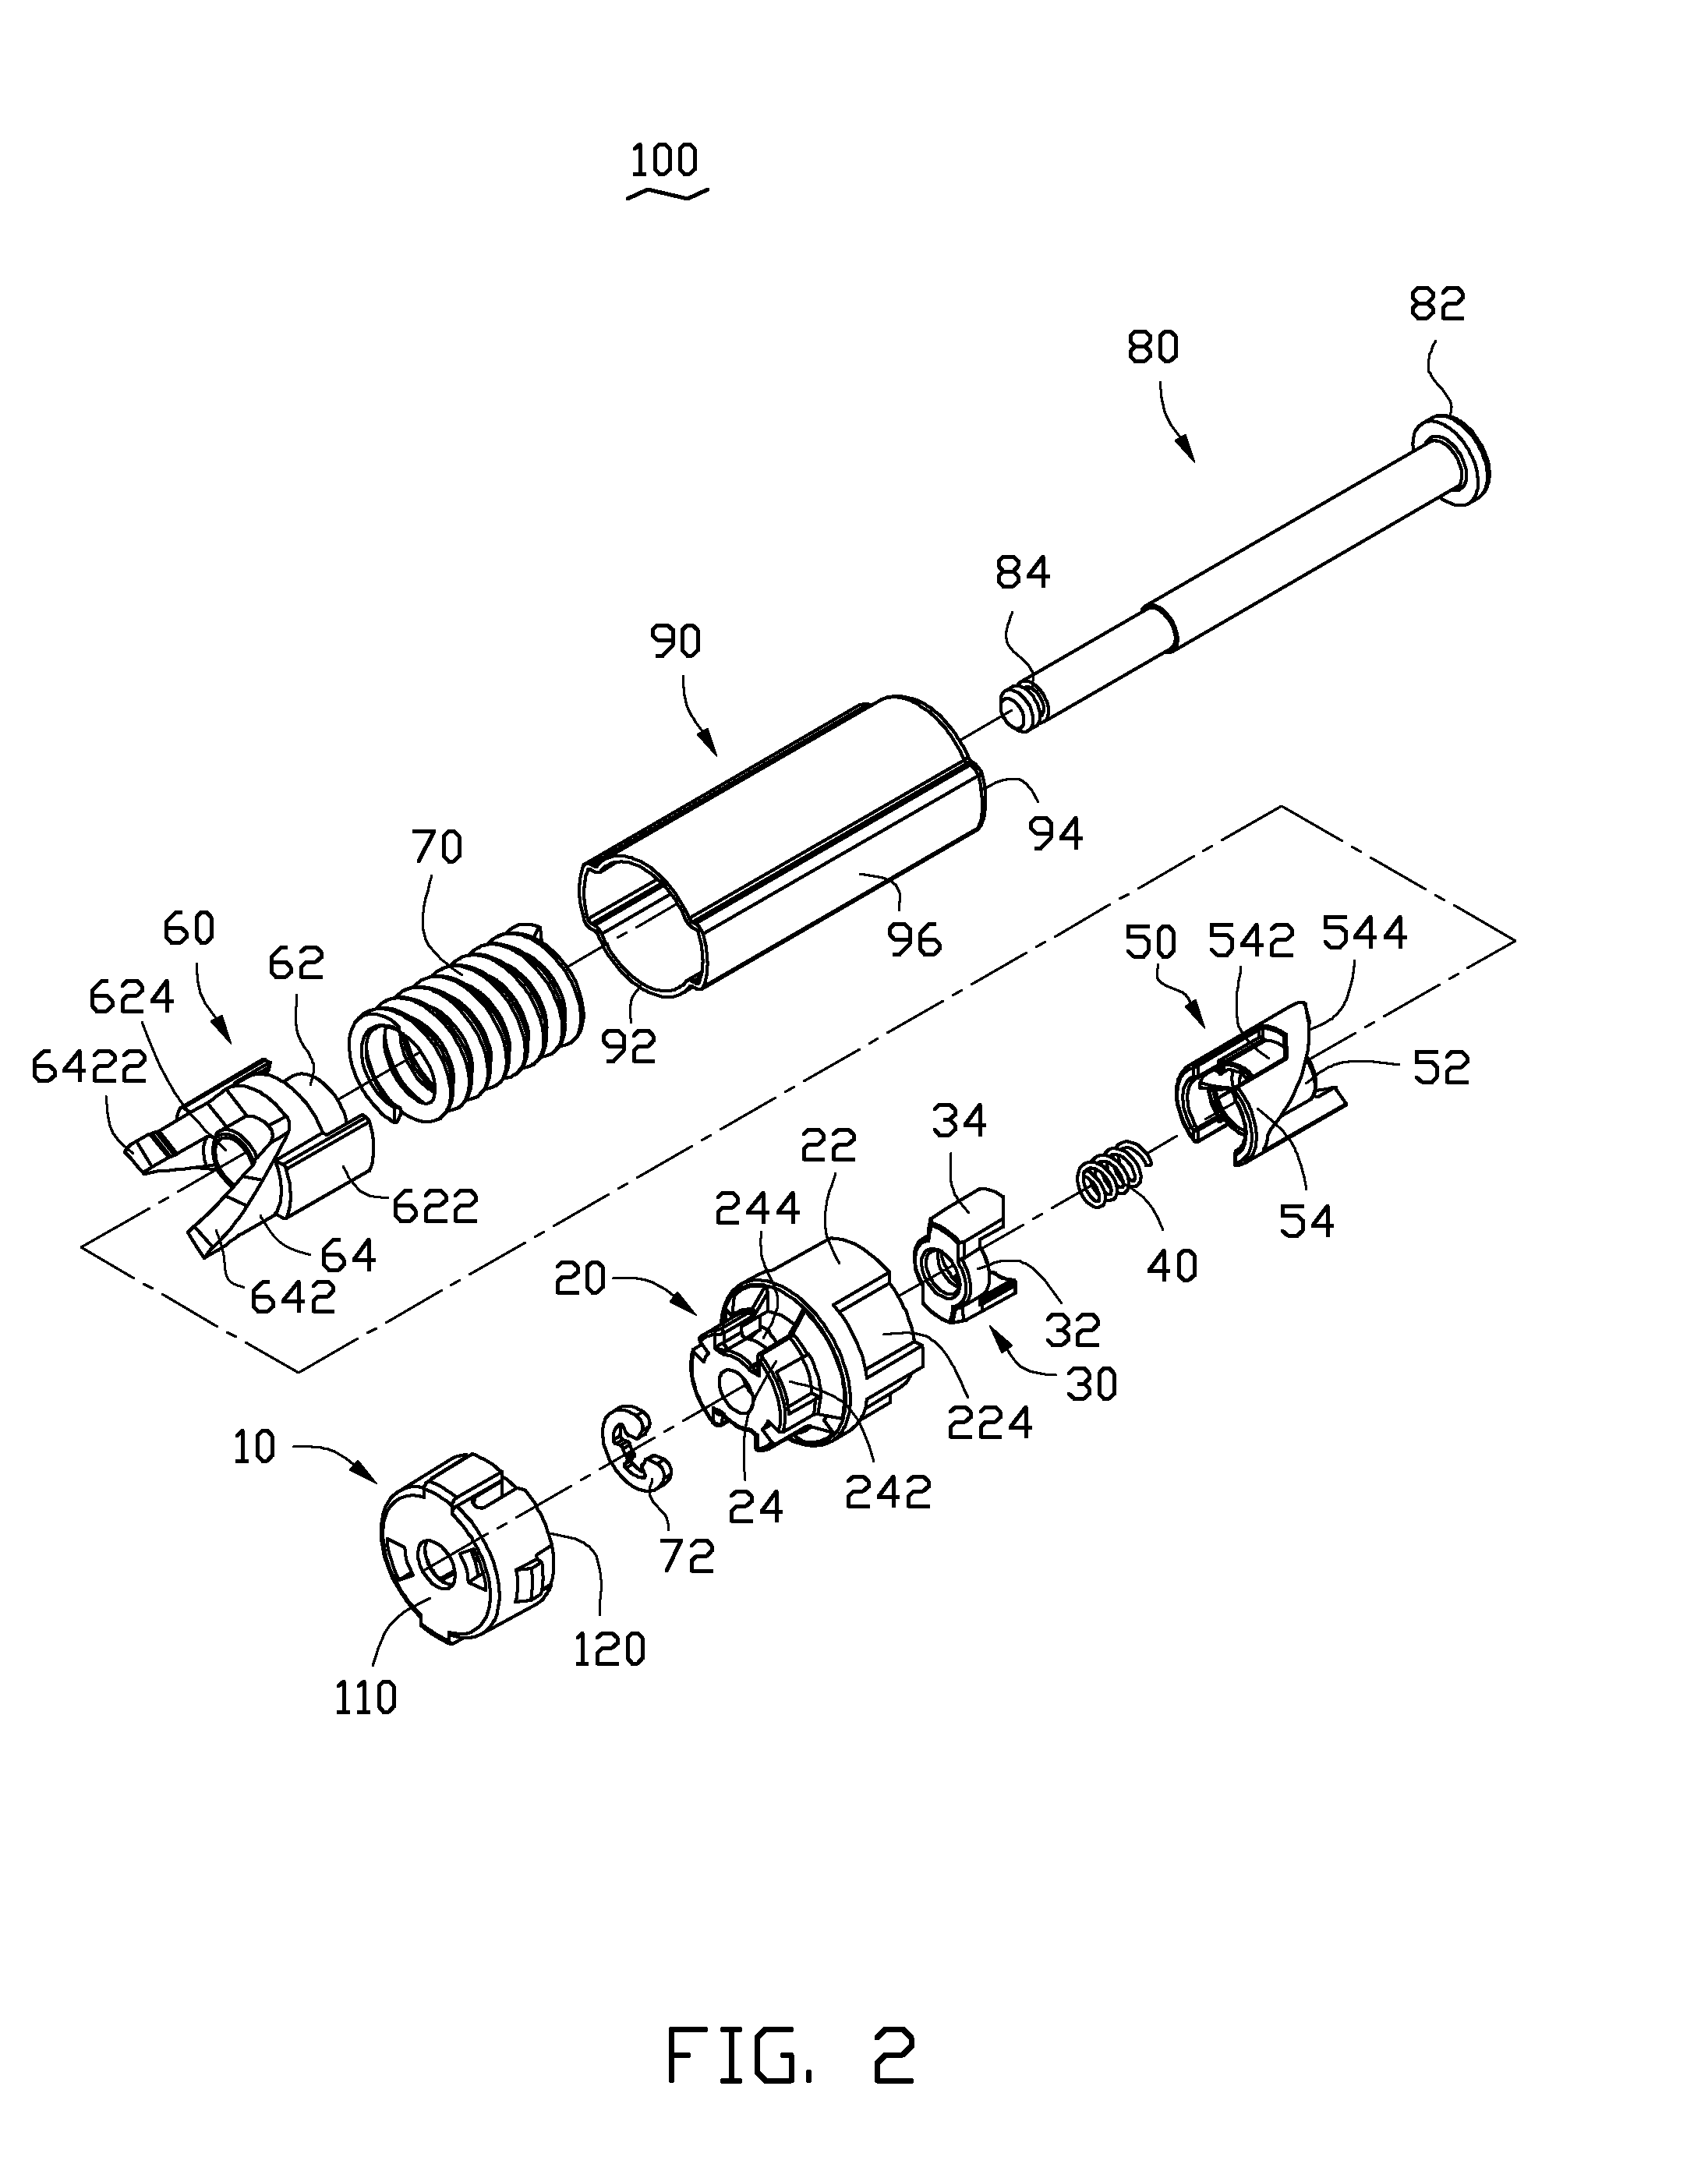 Button activated spring-loaded hinge assembly